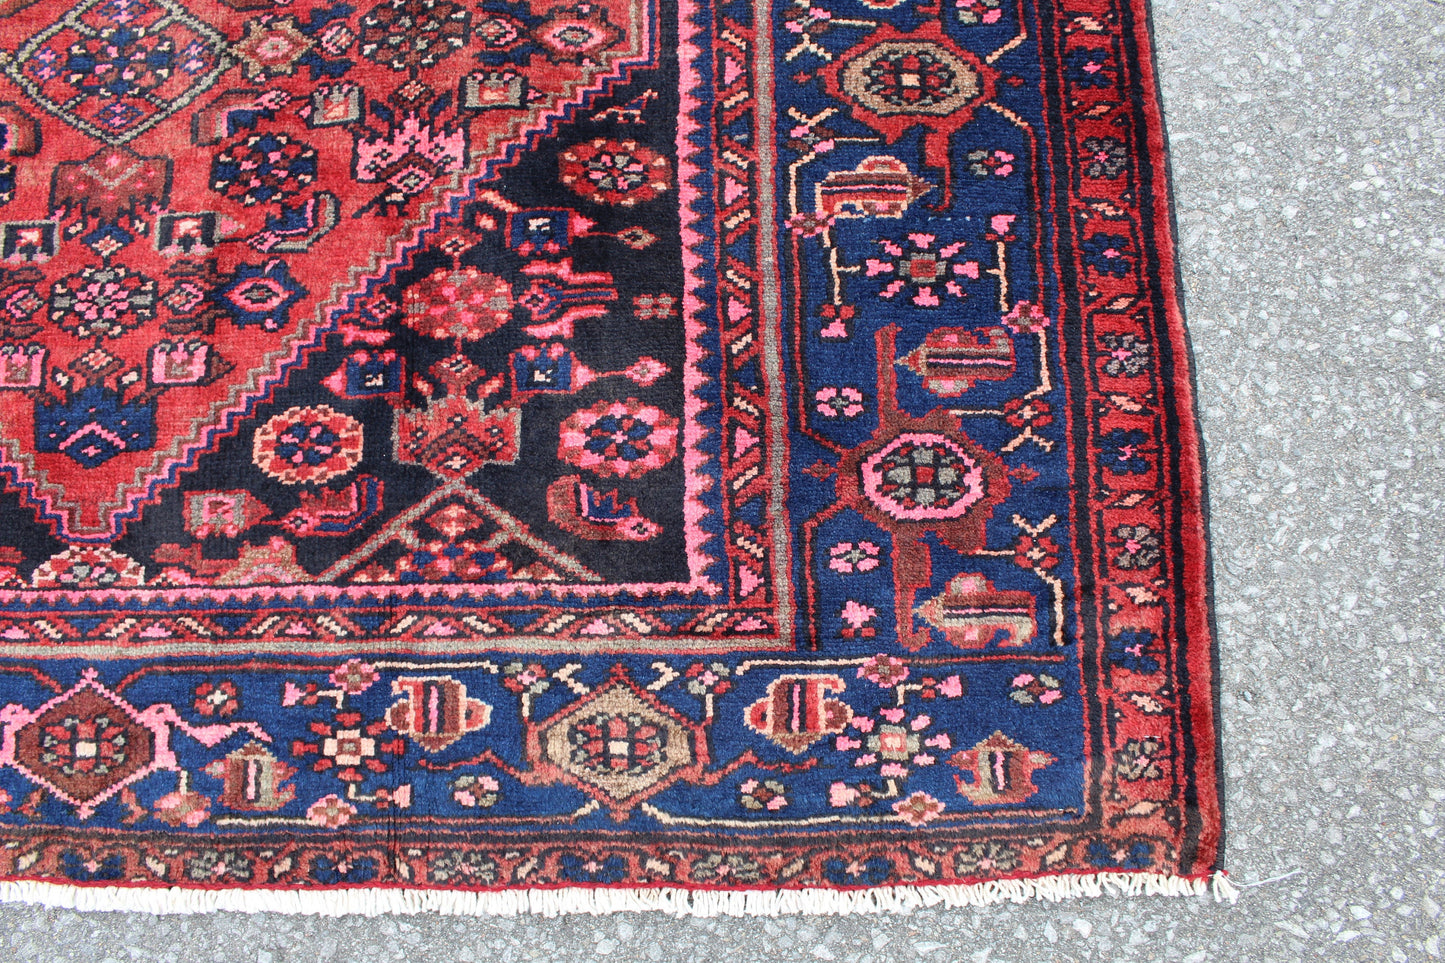 Rusty Pink & Blue 5x6 Persian Tribal Wool Hand Knotted Area Rug